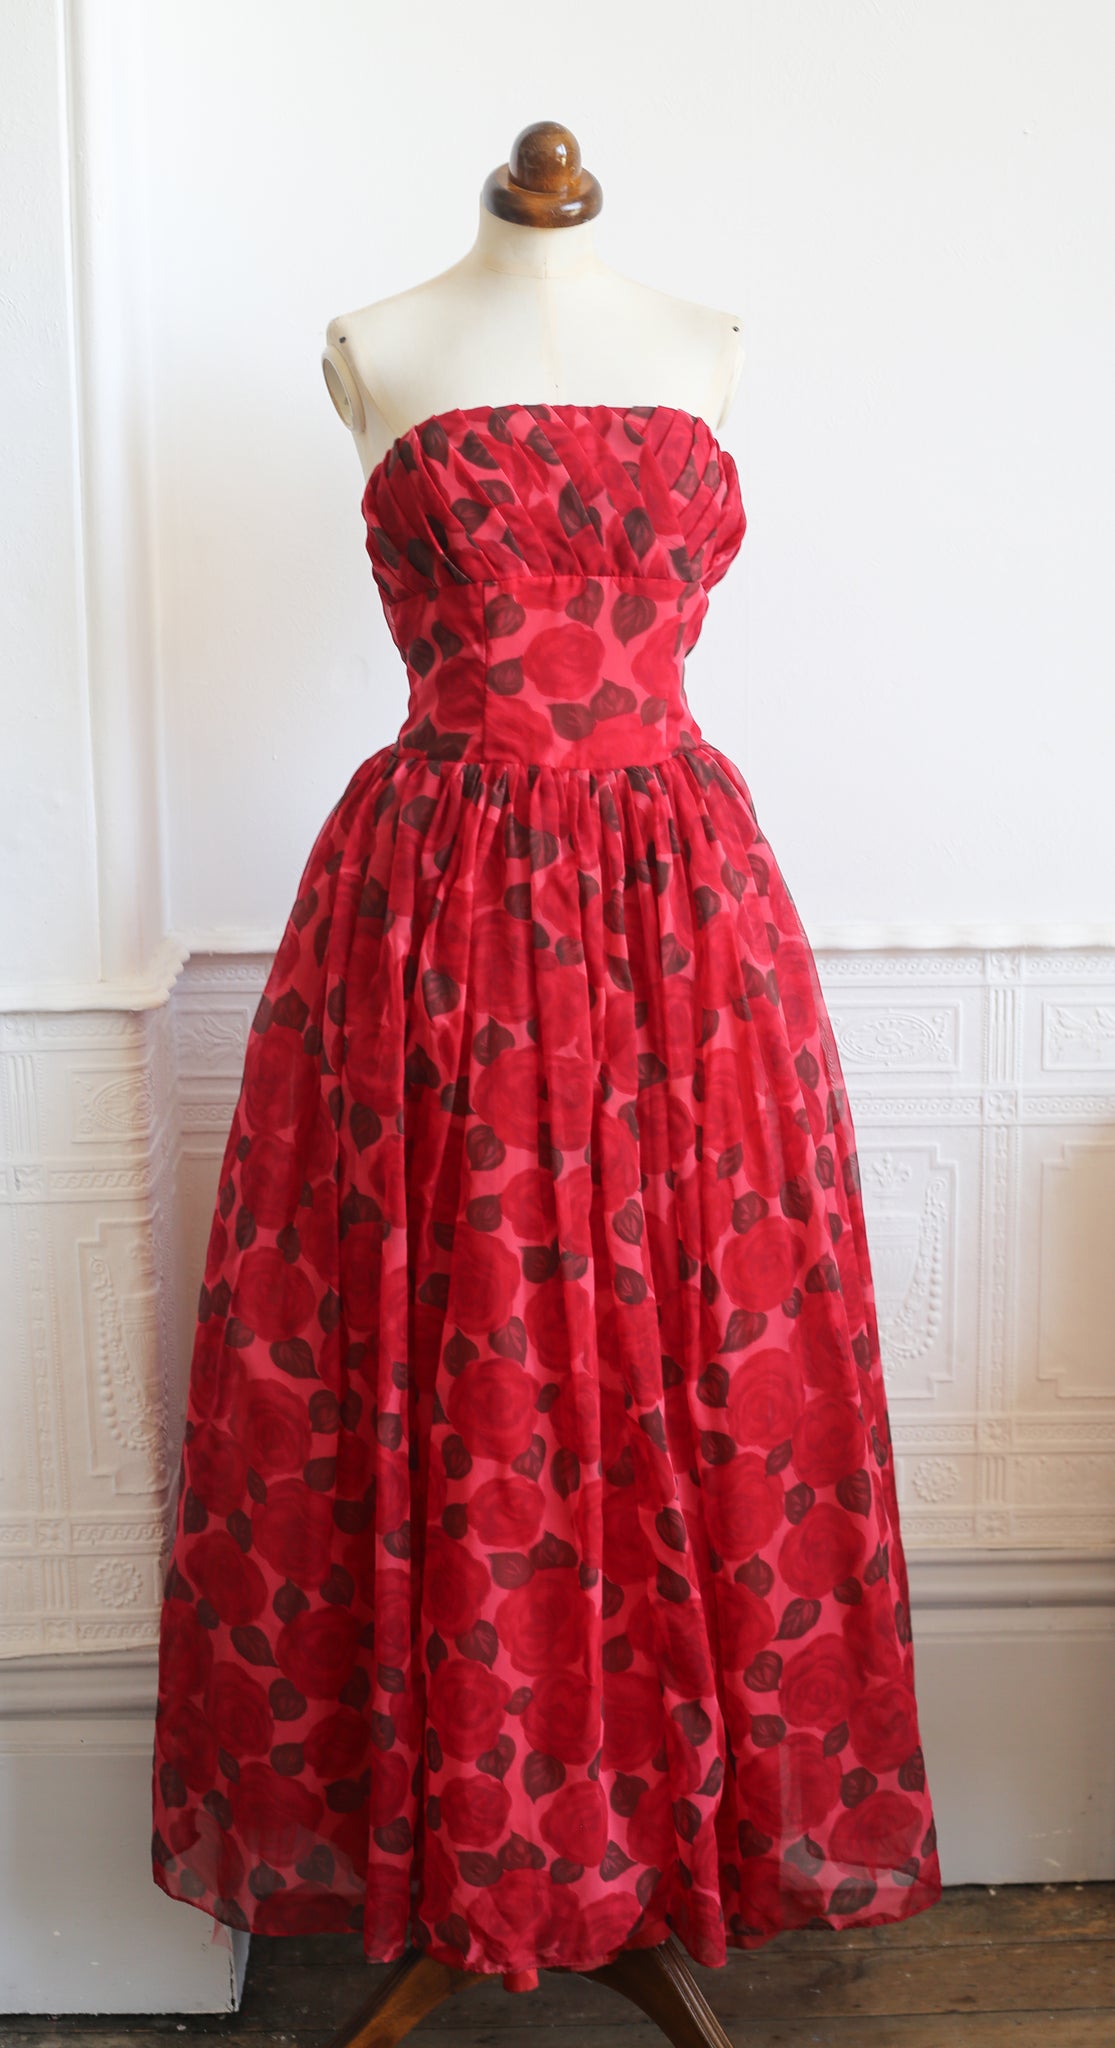 red rose ball gown